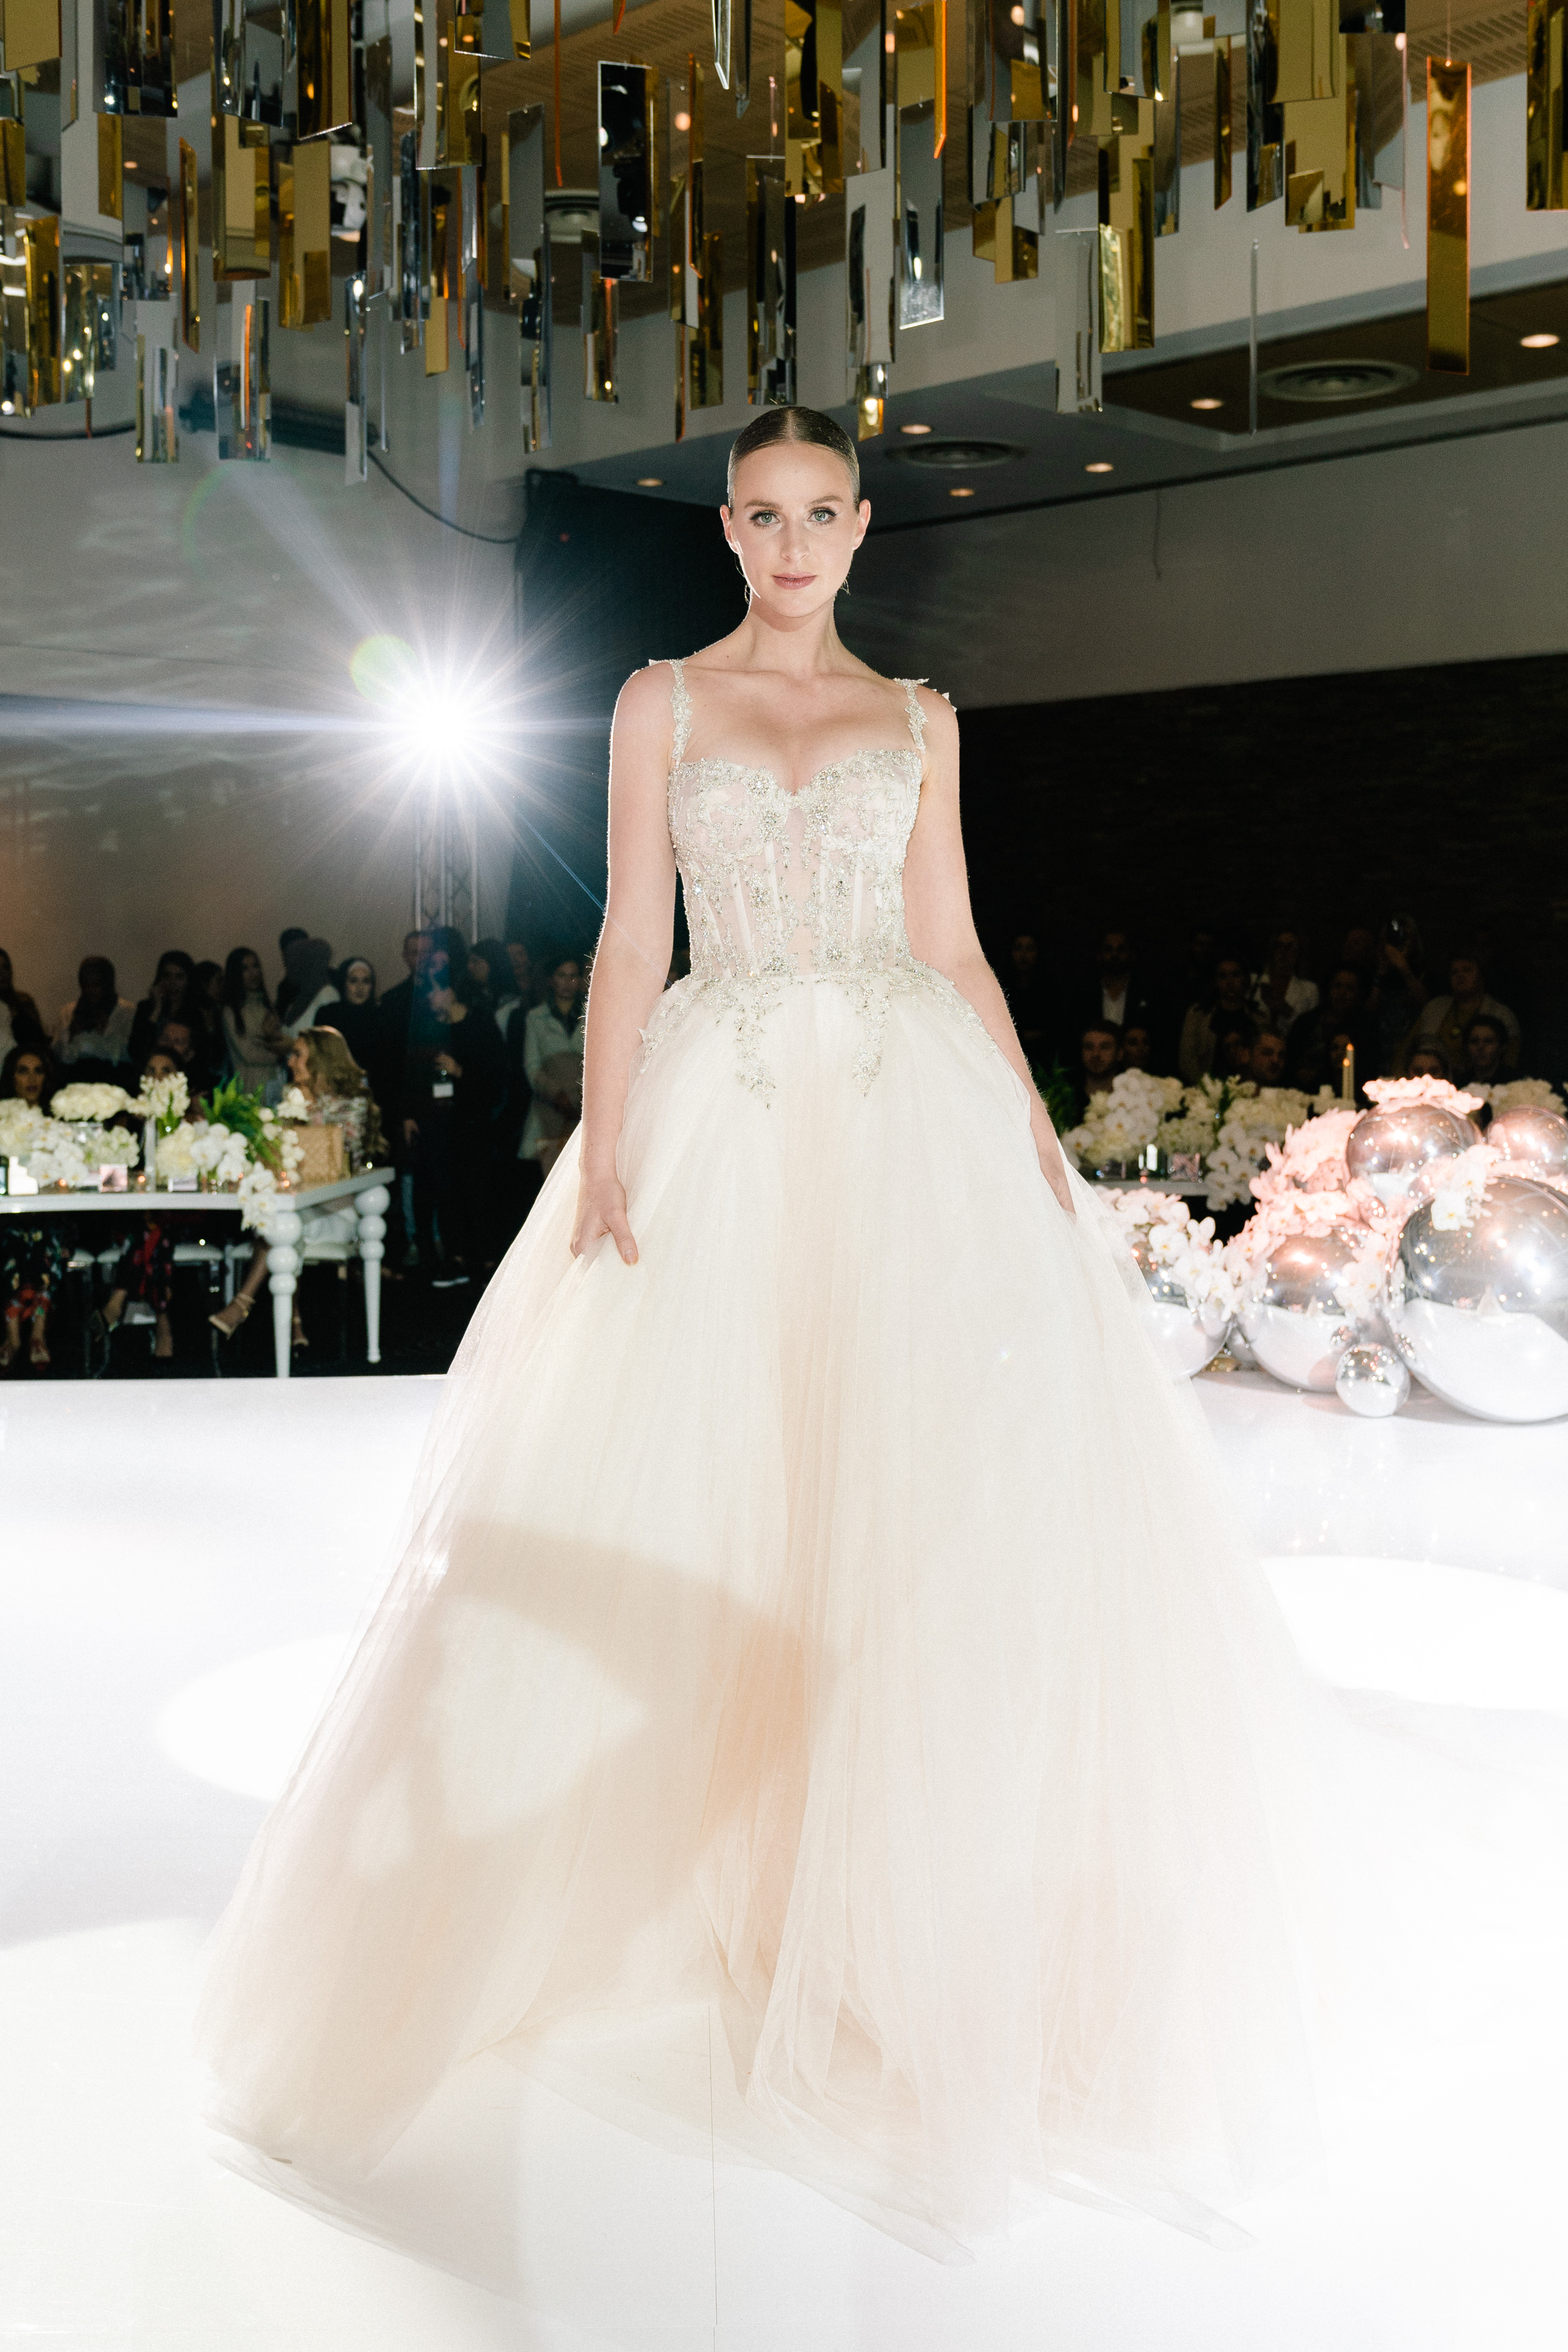 100 Years Of The Most Popular Wedding Dress Styles ...